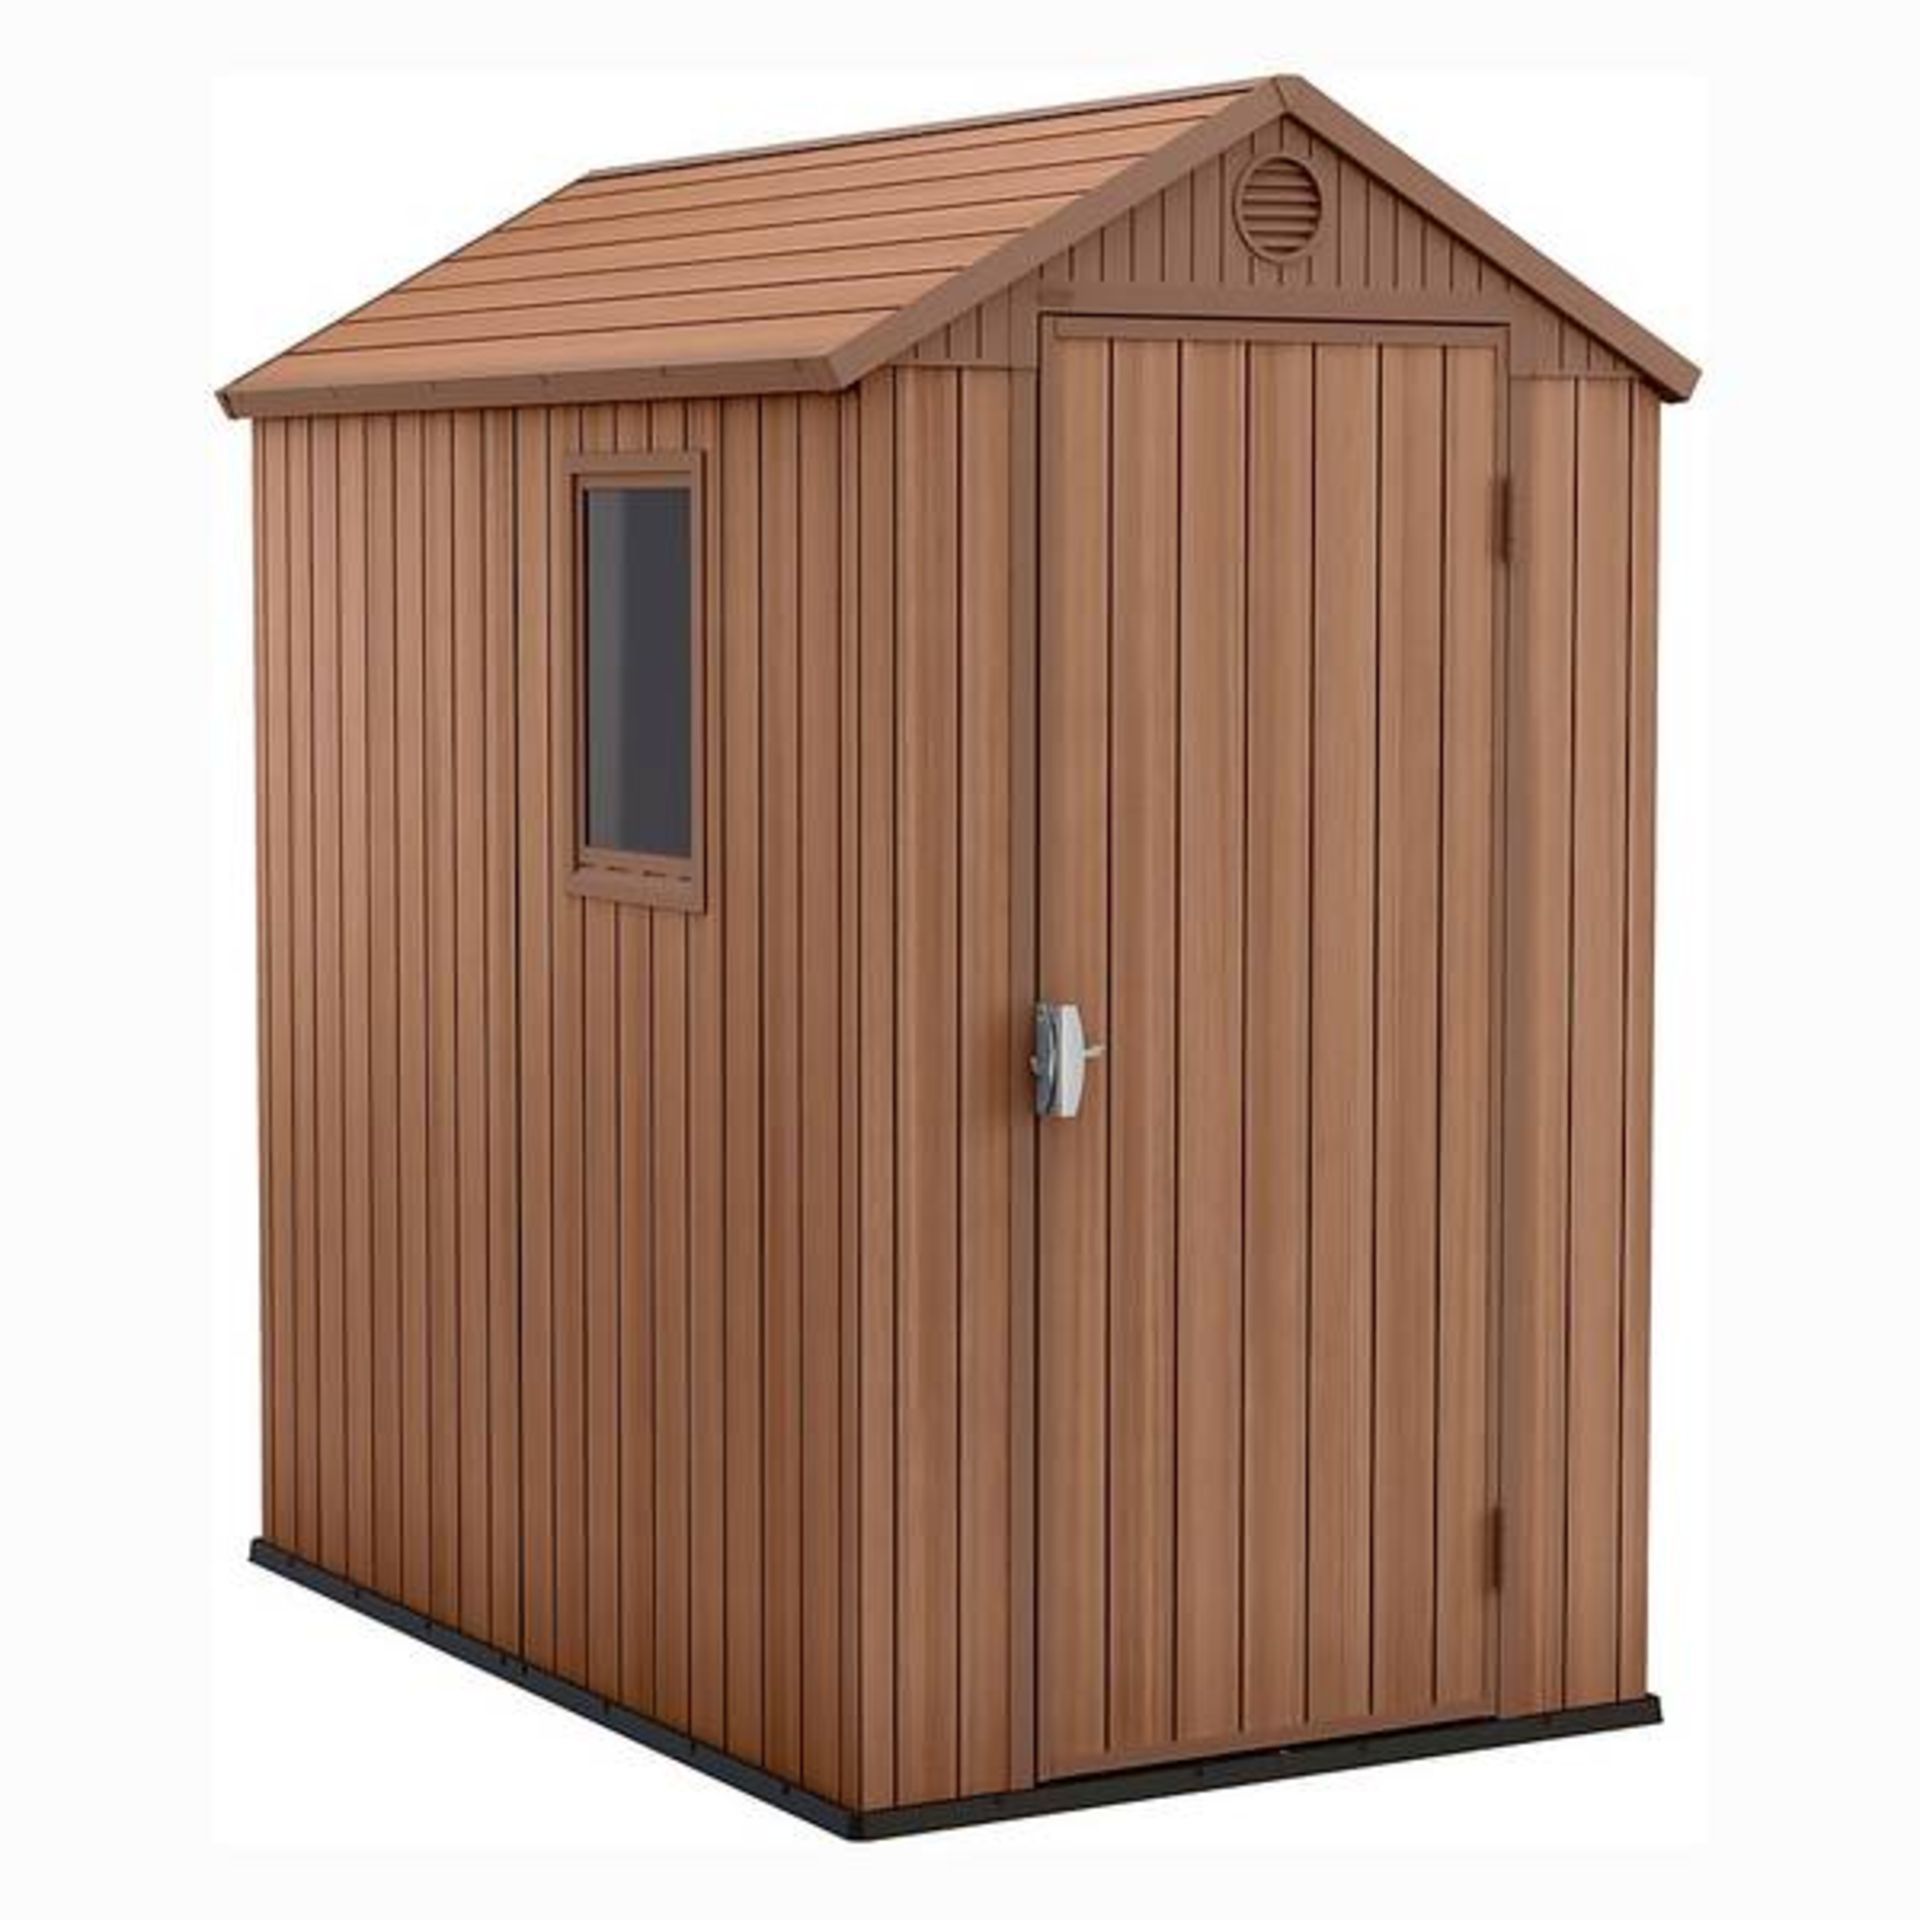 (R16) 1x Keter Darwin 4x6 Outdoor Plastic Garden Storage Shed RRP £340. - Image 2 of 3